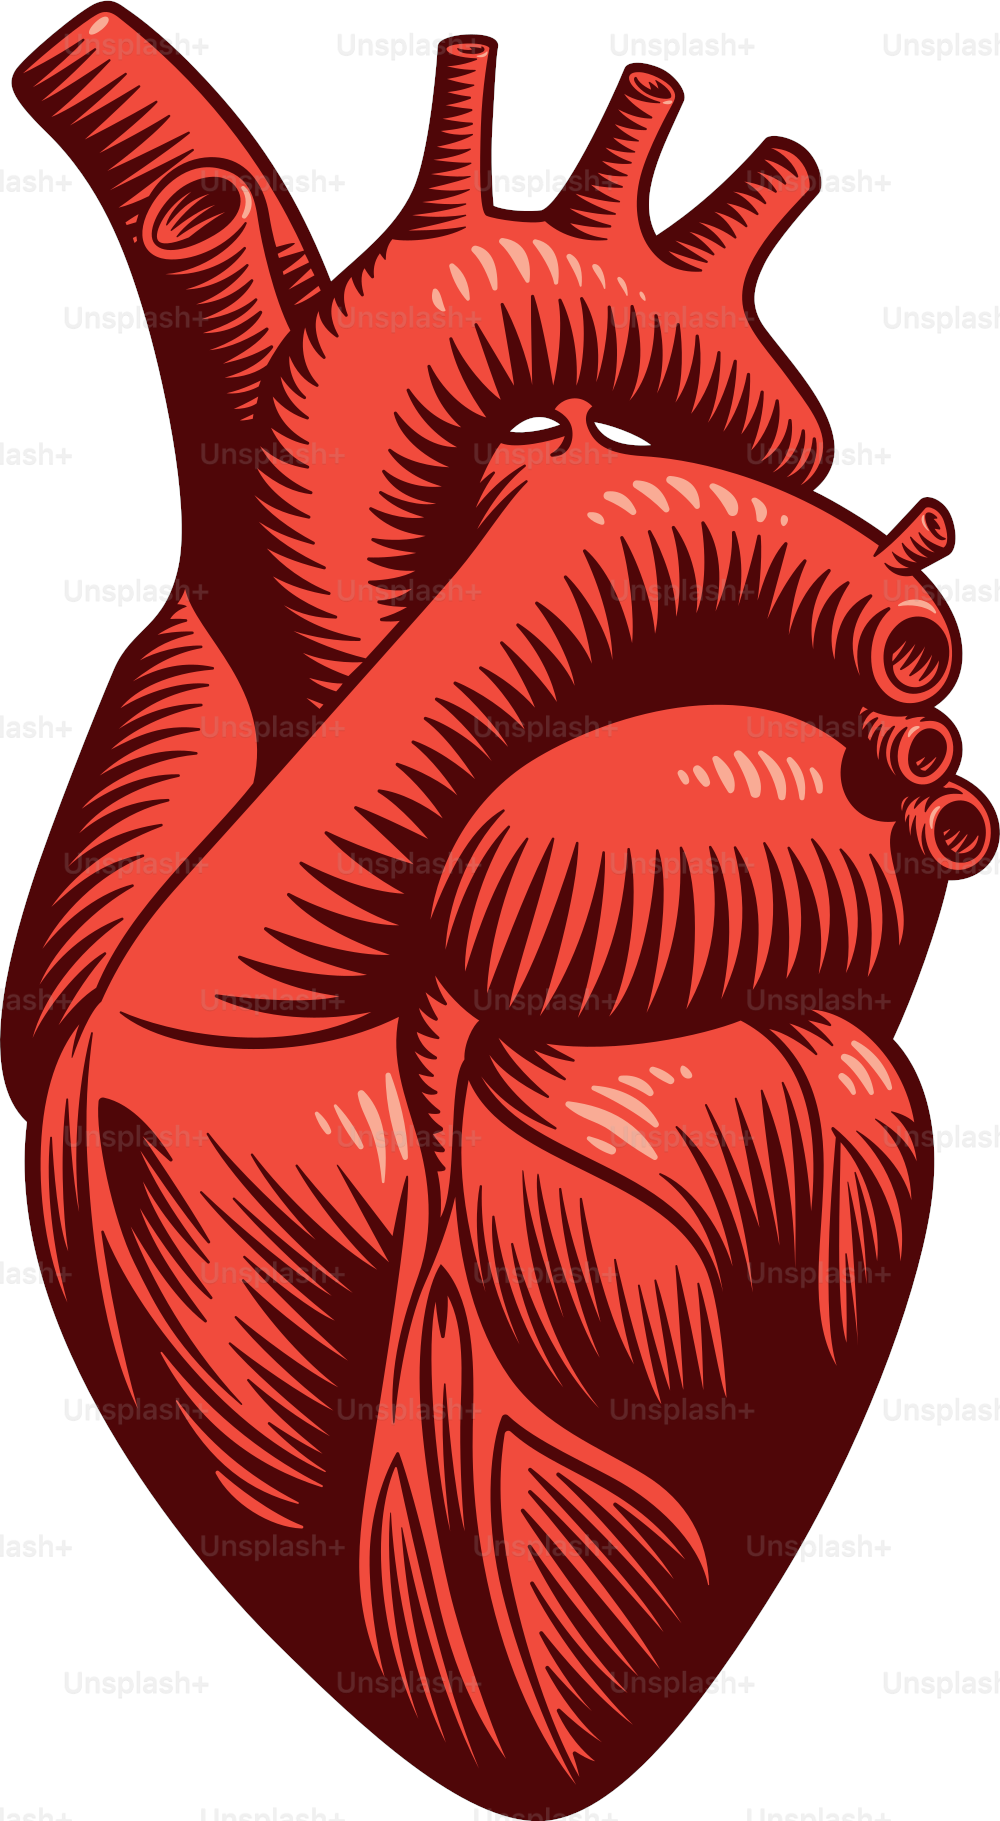 Vector, tattoo style illustration of a heart